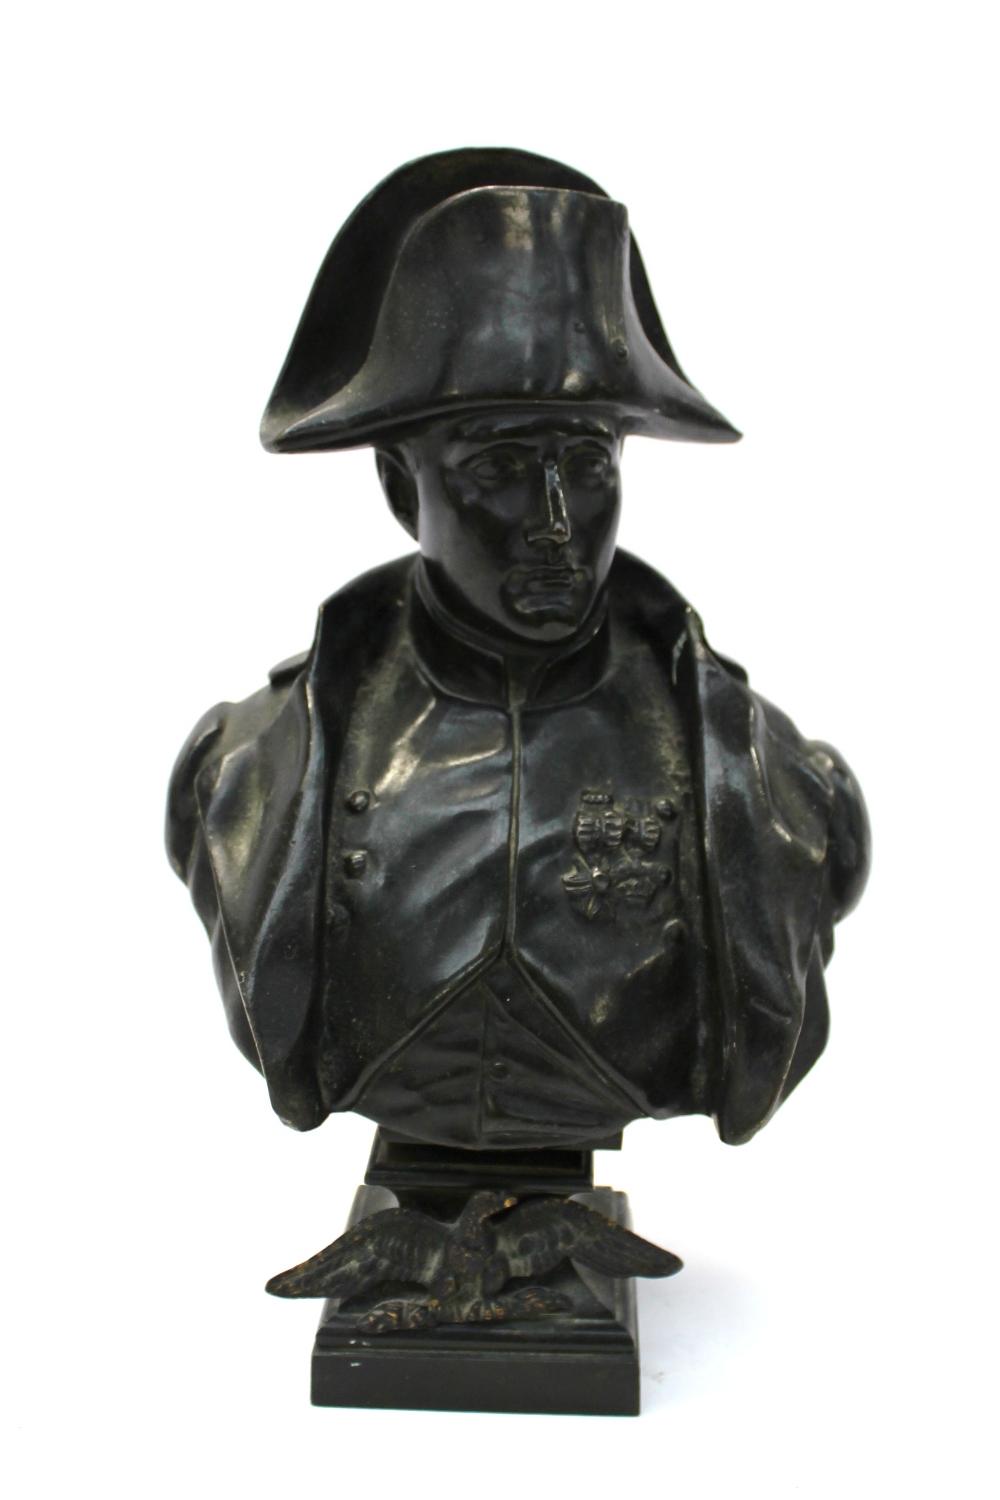 A bronze bust of Napoleon wearing a hat and jacket, with medals on his chest, the base mounted